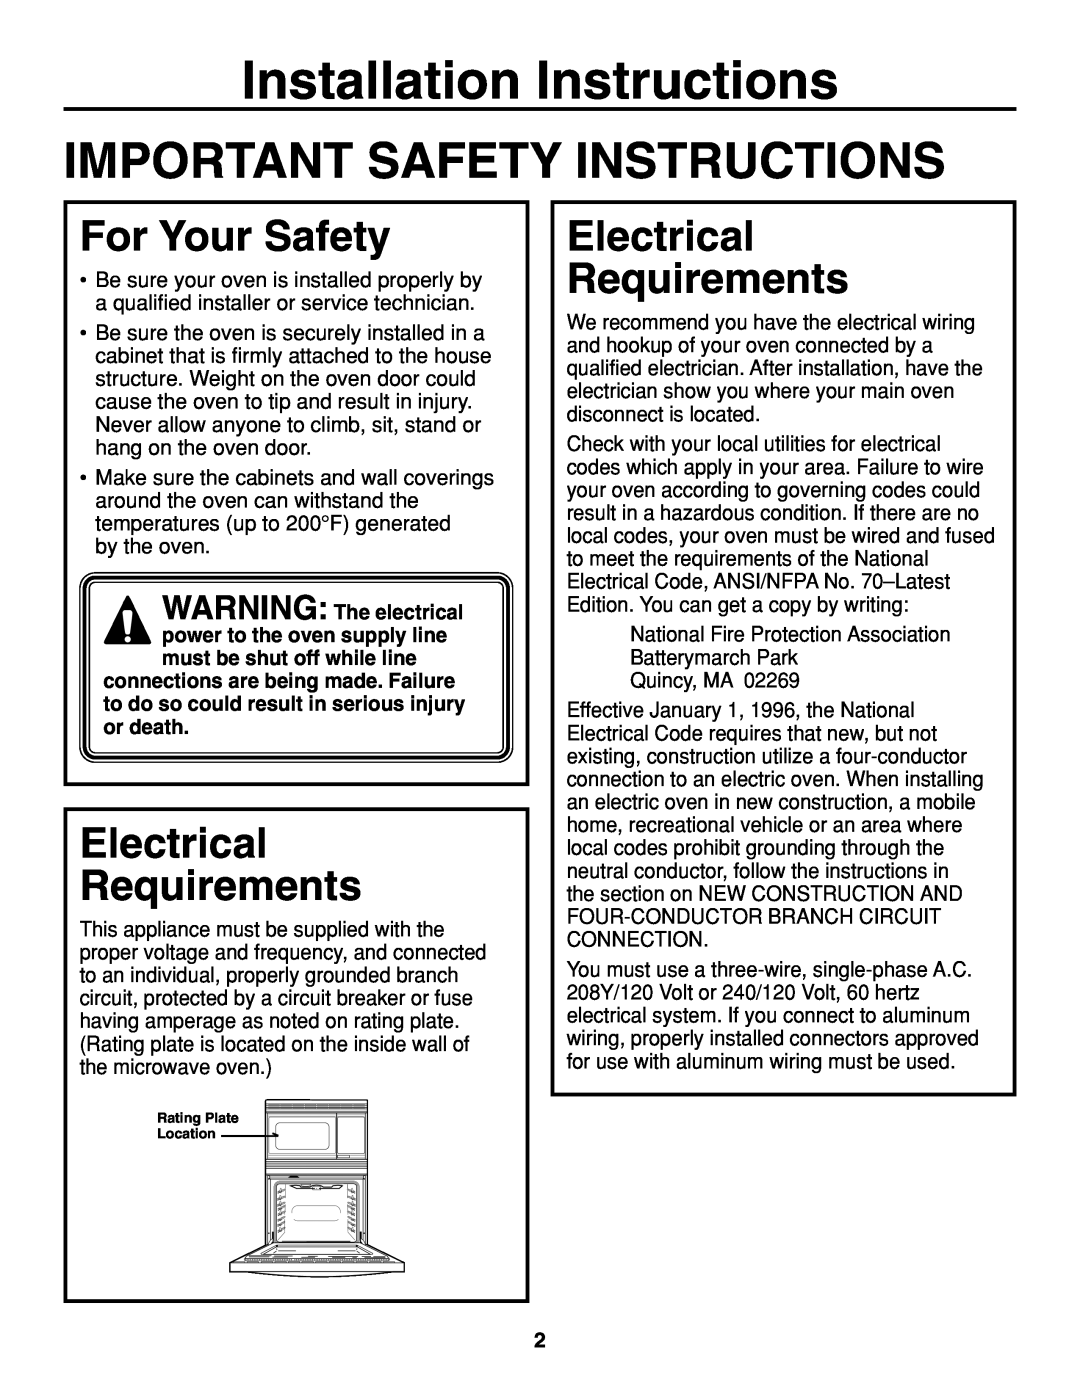 GE JTP86 Installation Instructions, Important Safety Instructions, For Your Safety, Electrical Requirements 